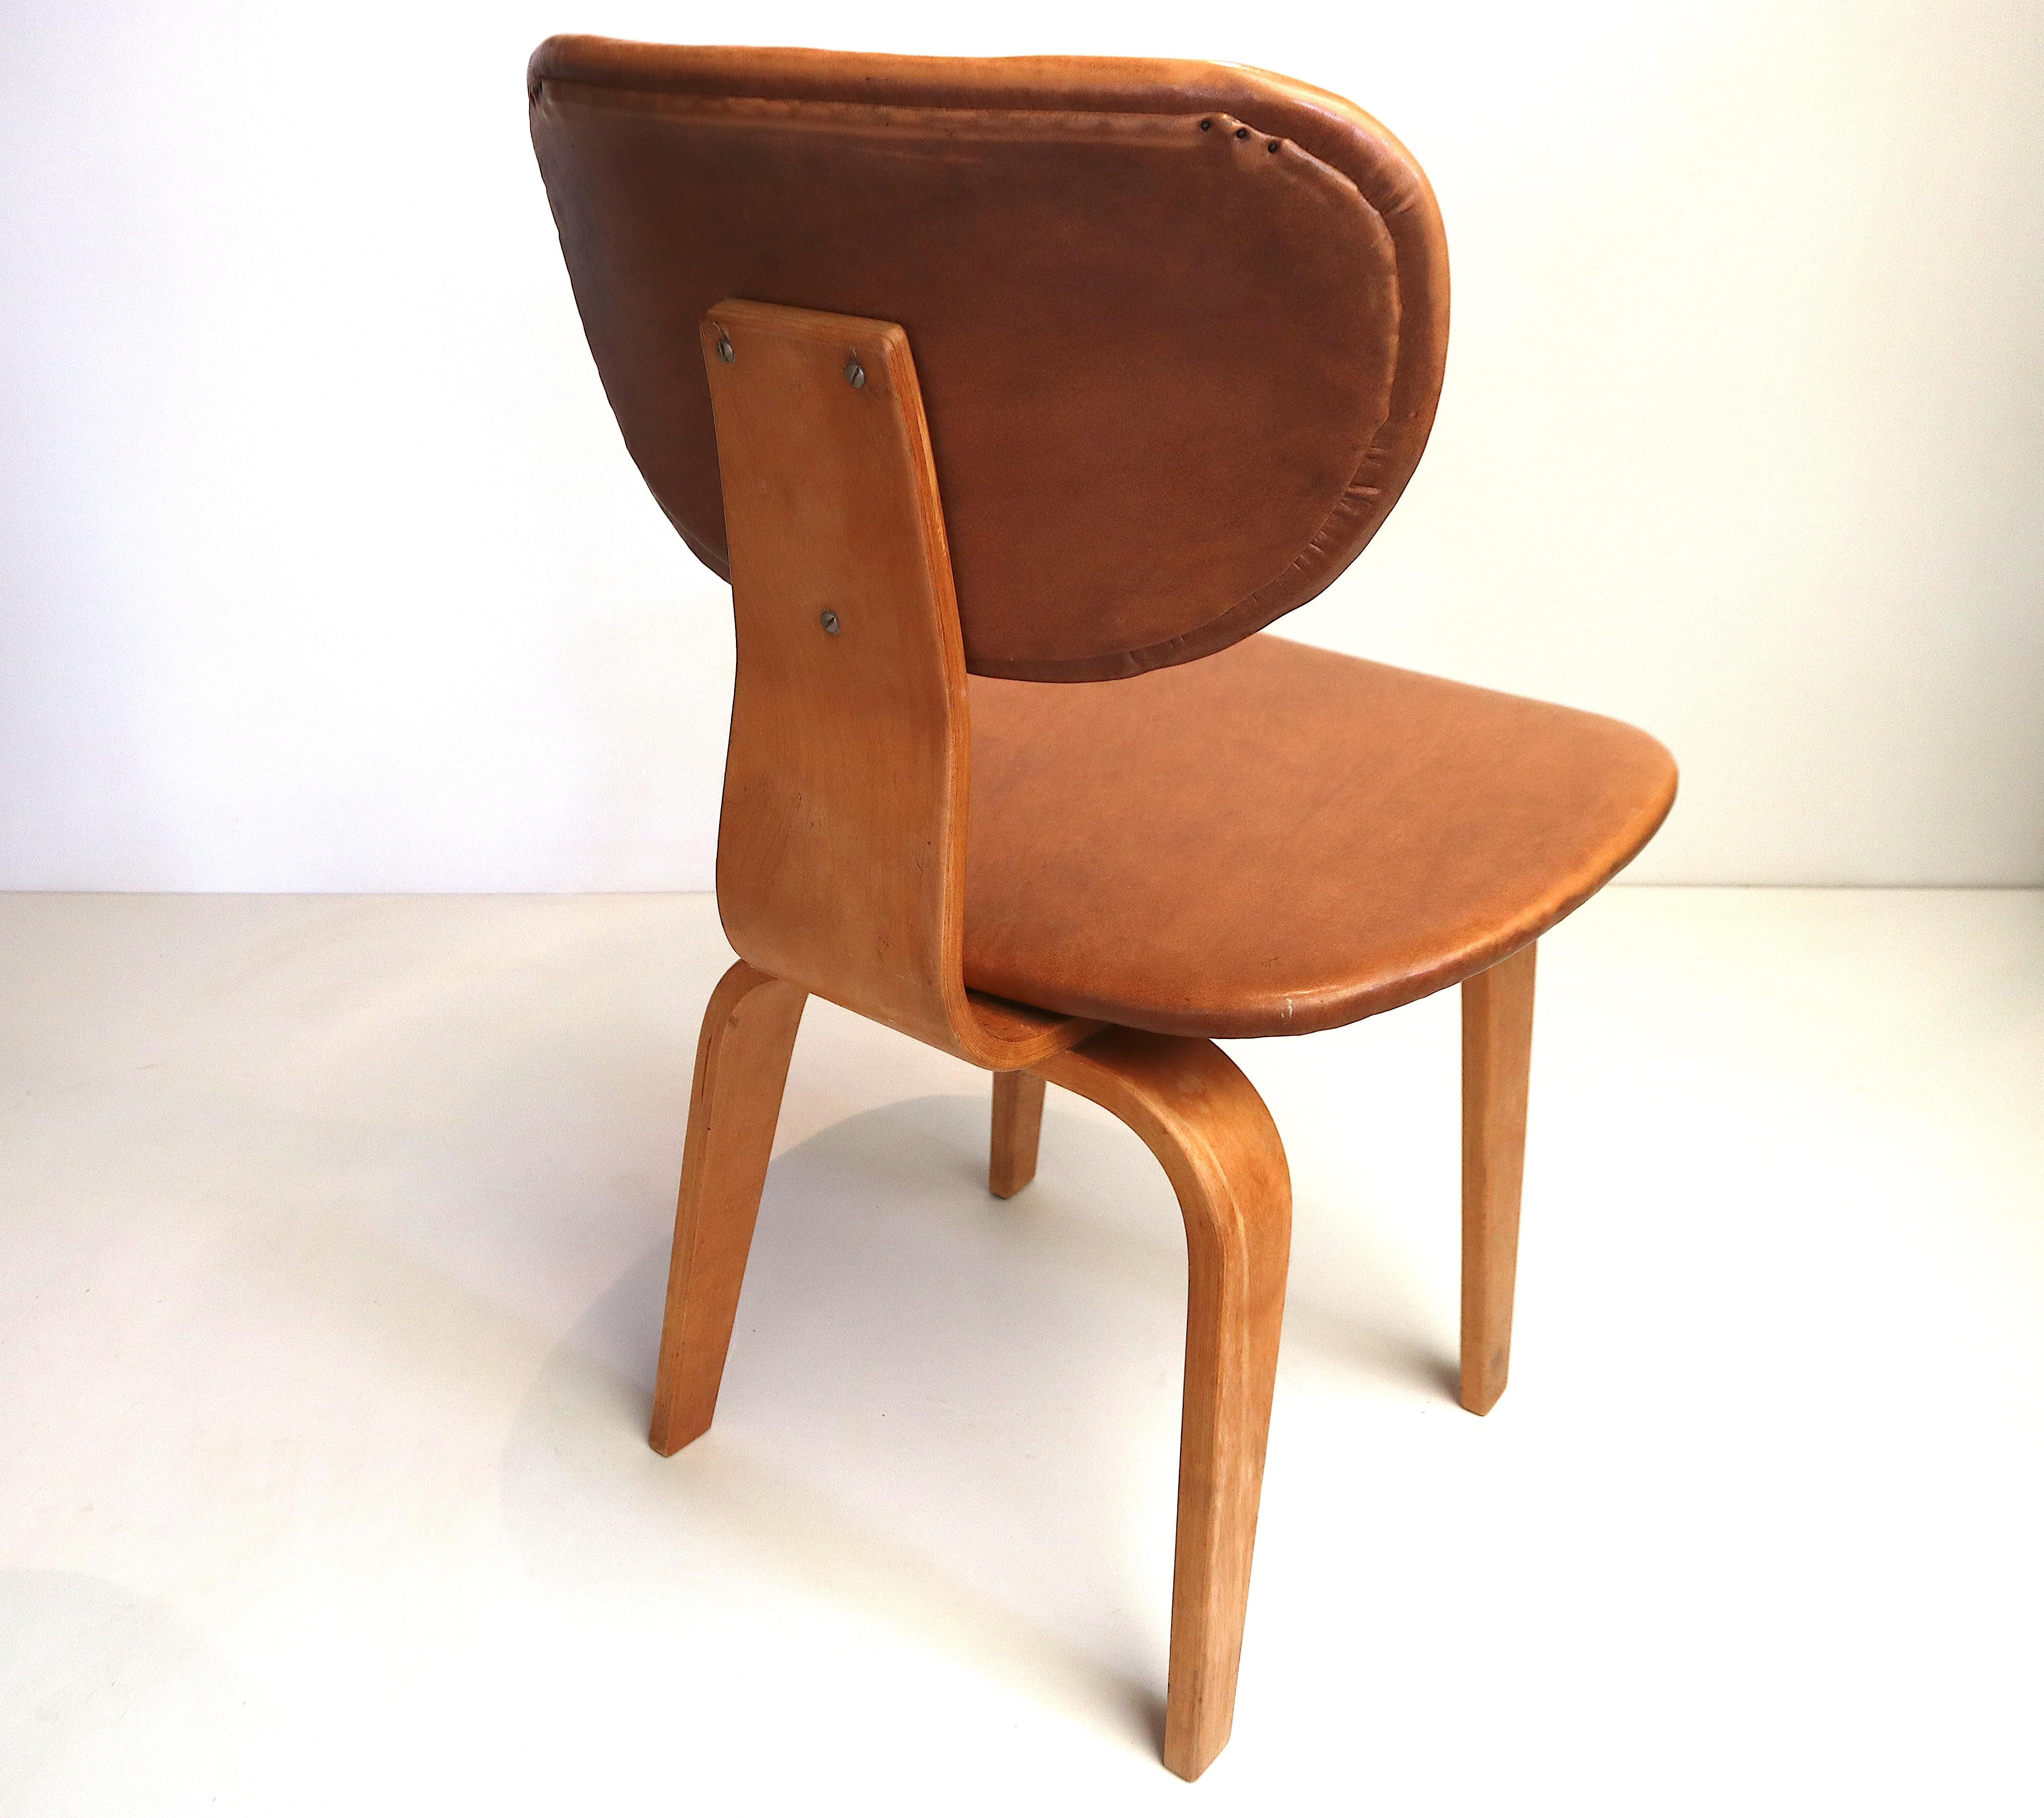 Mid-20th Century Plywood Desk or Side Chair by Cees Braakman for Pastoe Inspired by Eames, Dutch For Sale